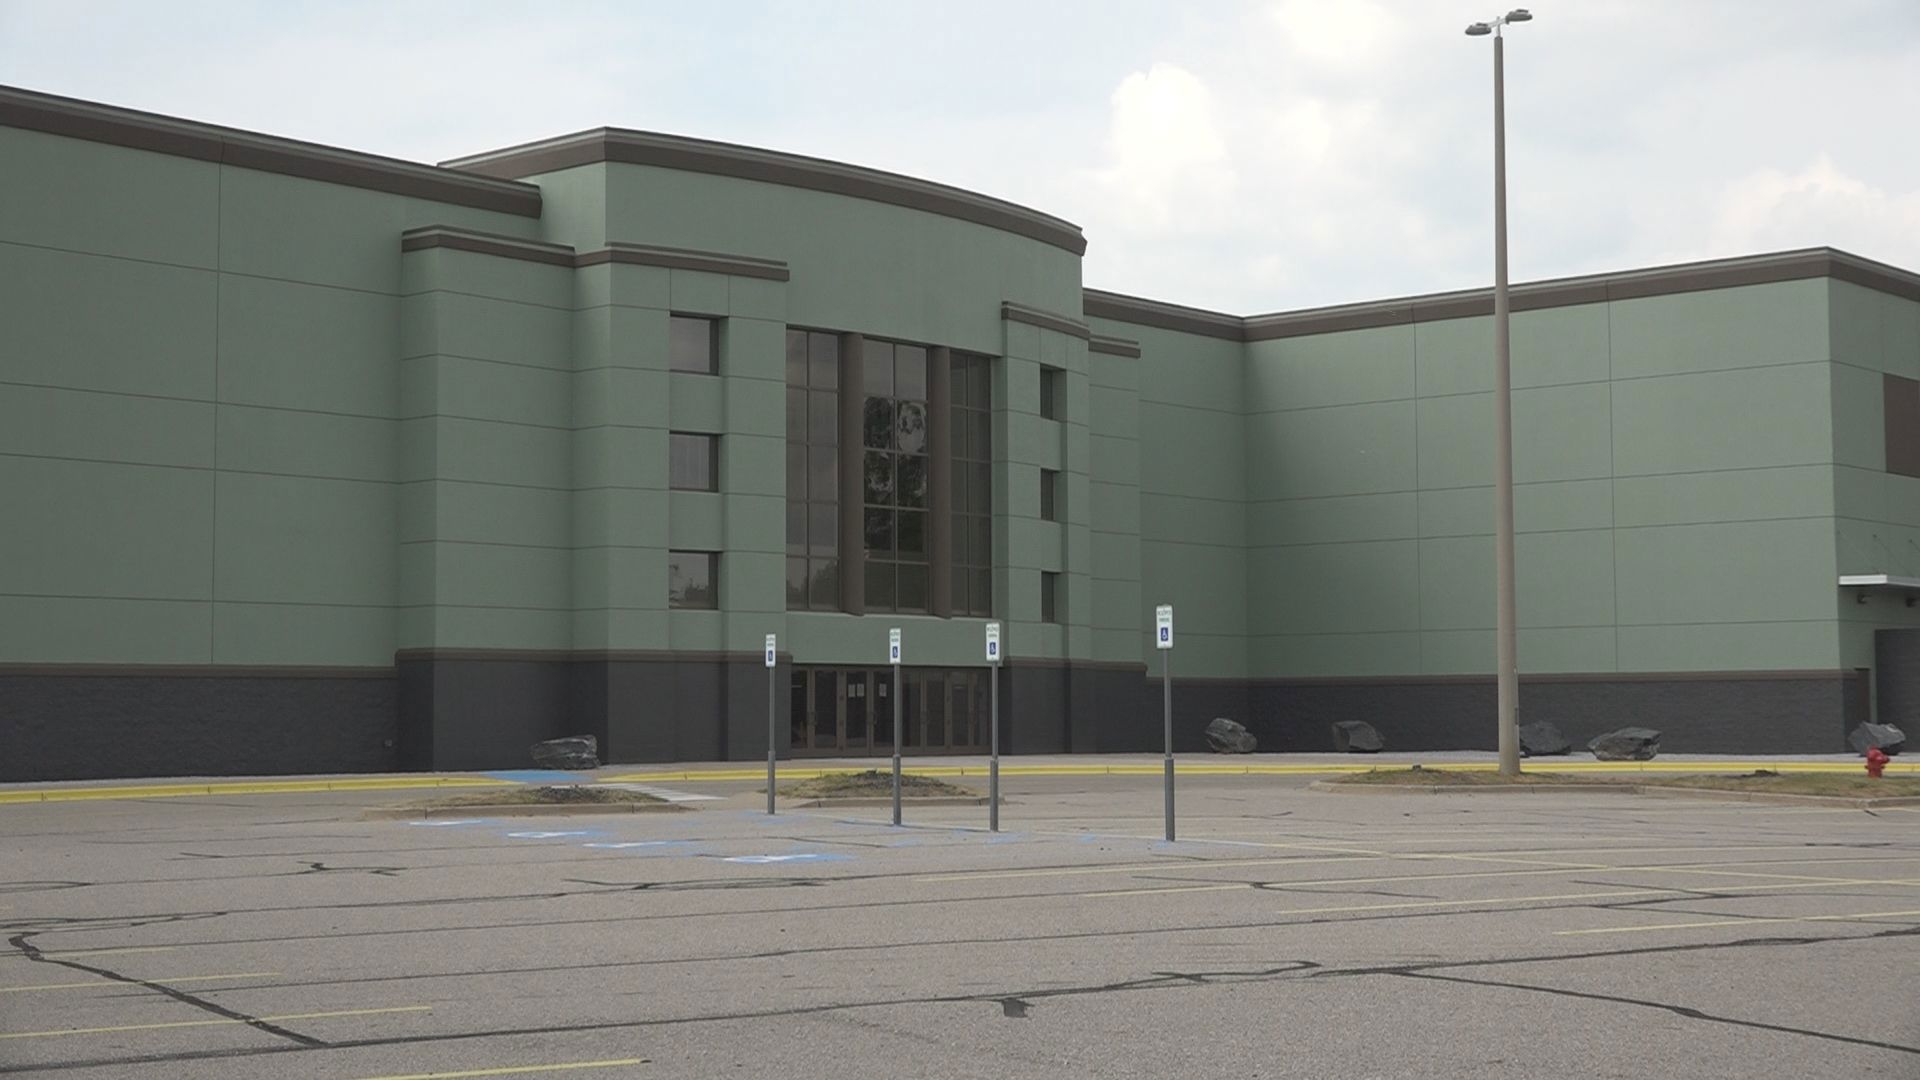 A new project is underway at Rivertown Crossings Mall. The plan is to restore and reconstruct the old Younkers Department store into new tenant spaces.